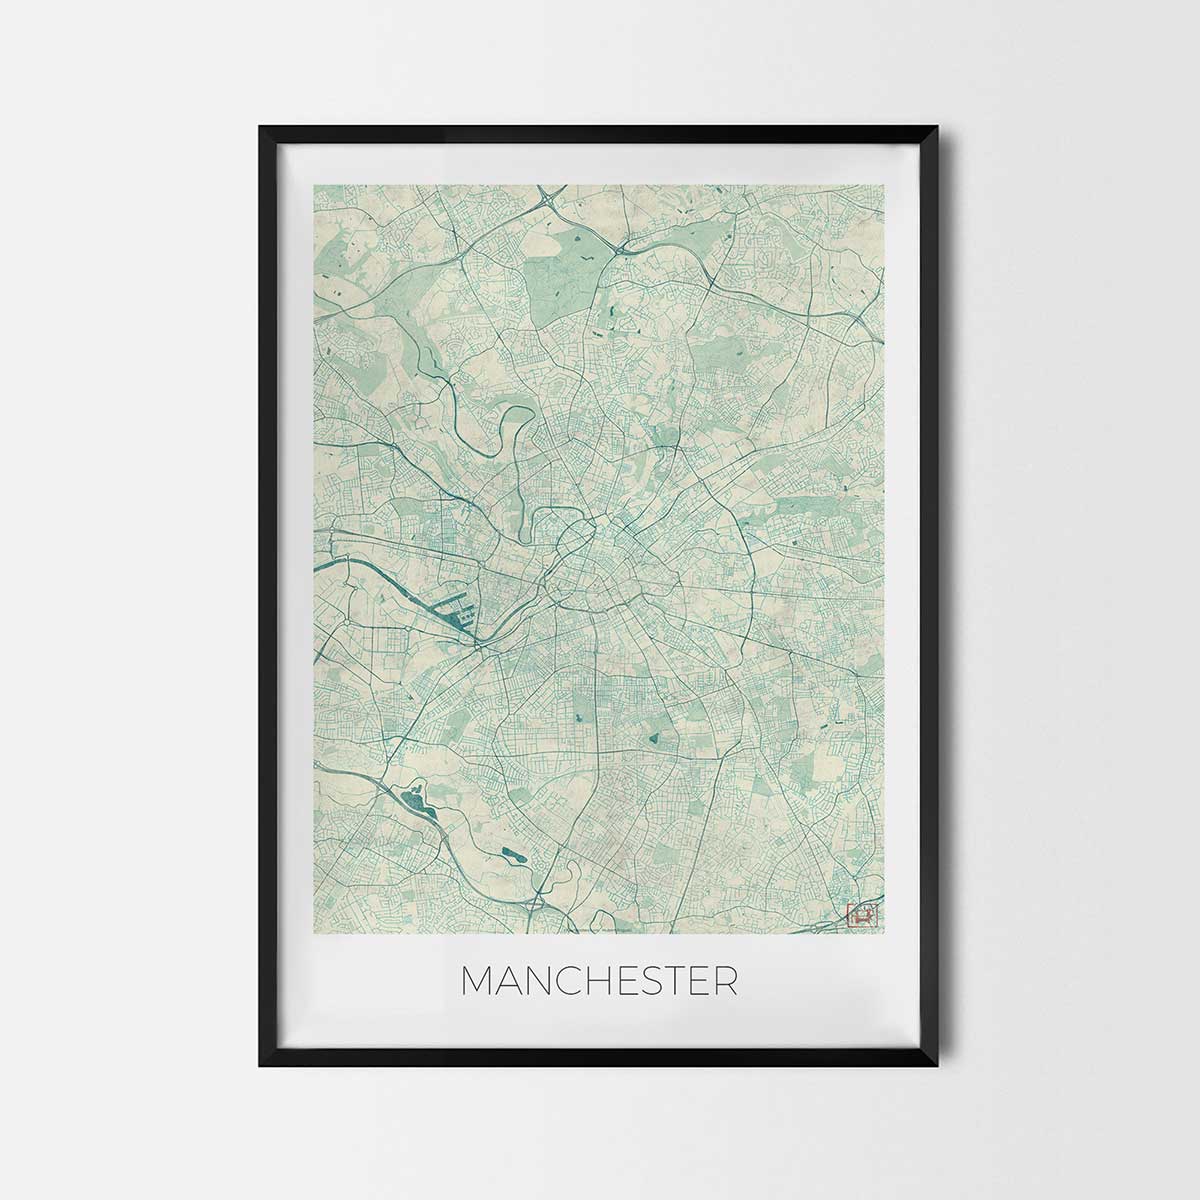 Manchester art posters city map art posters map posters city art prints city posters